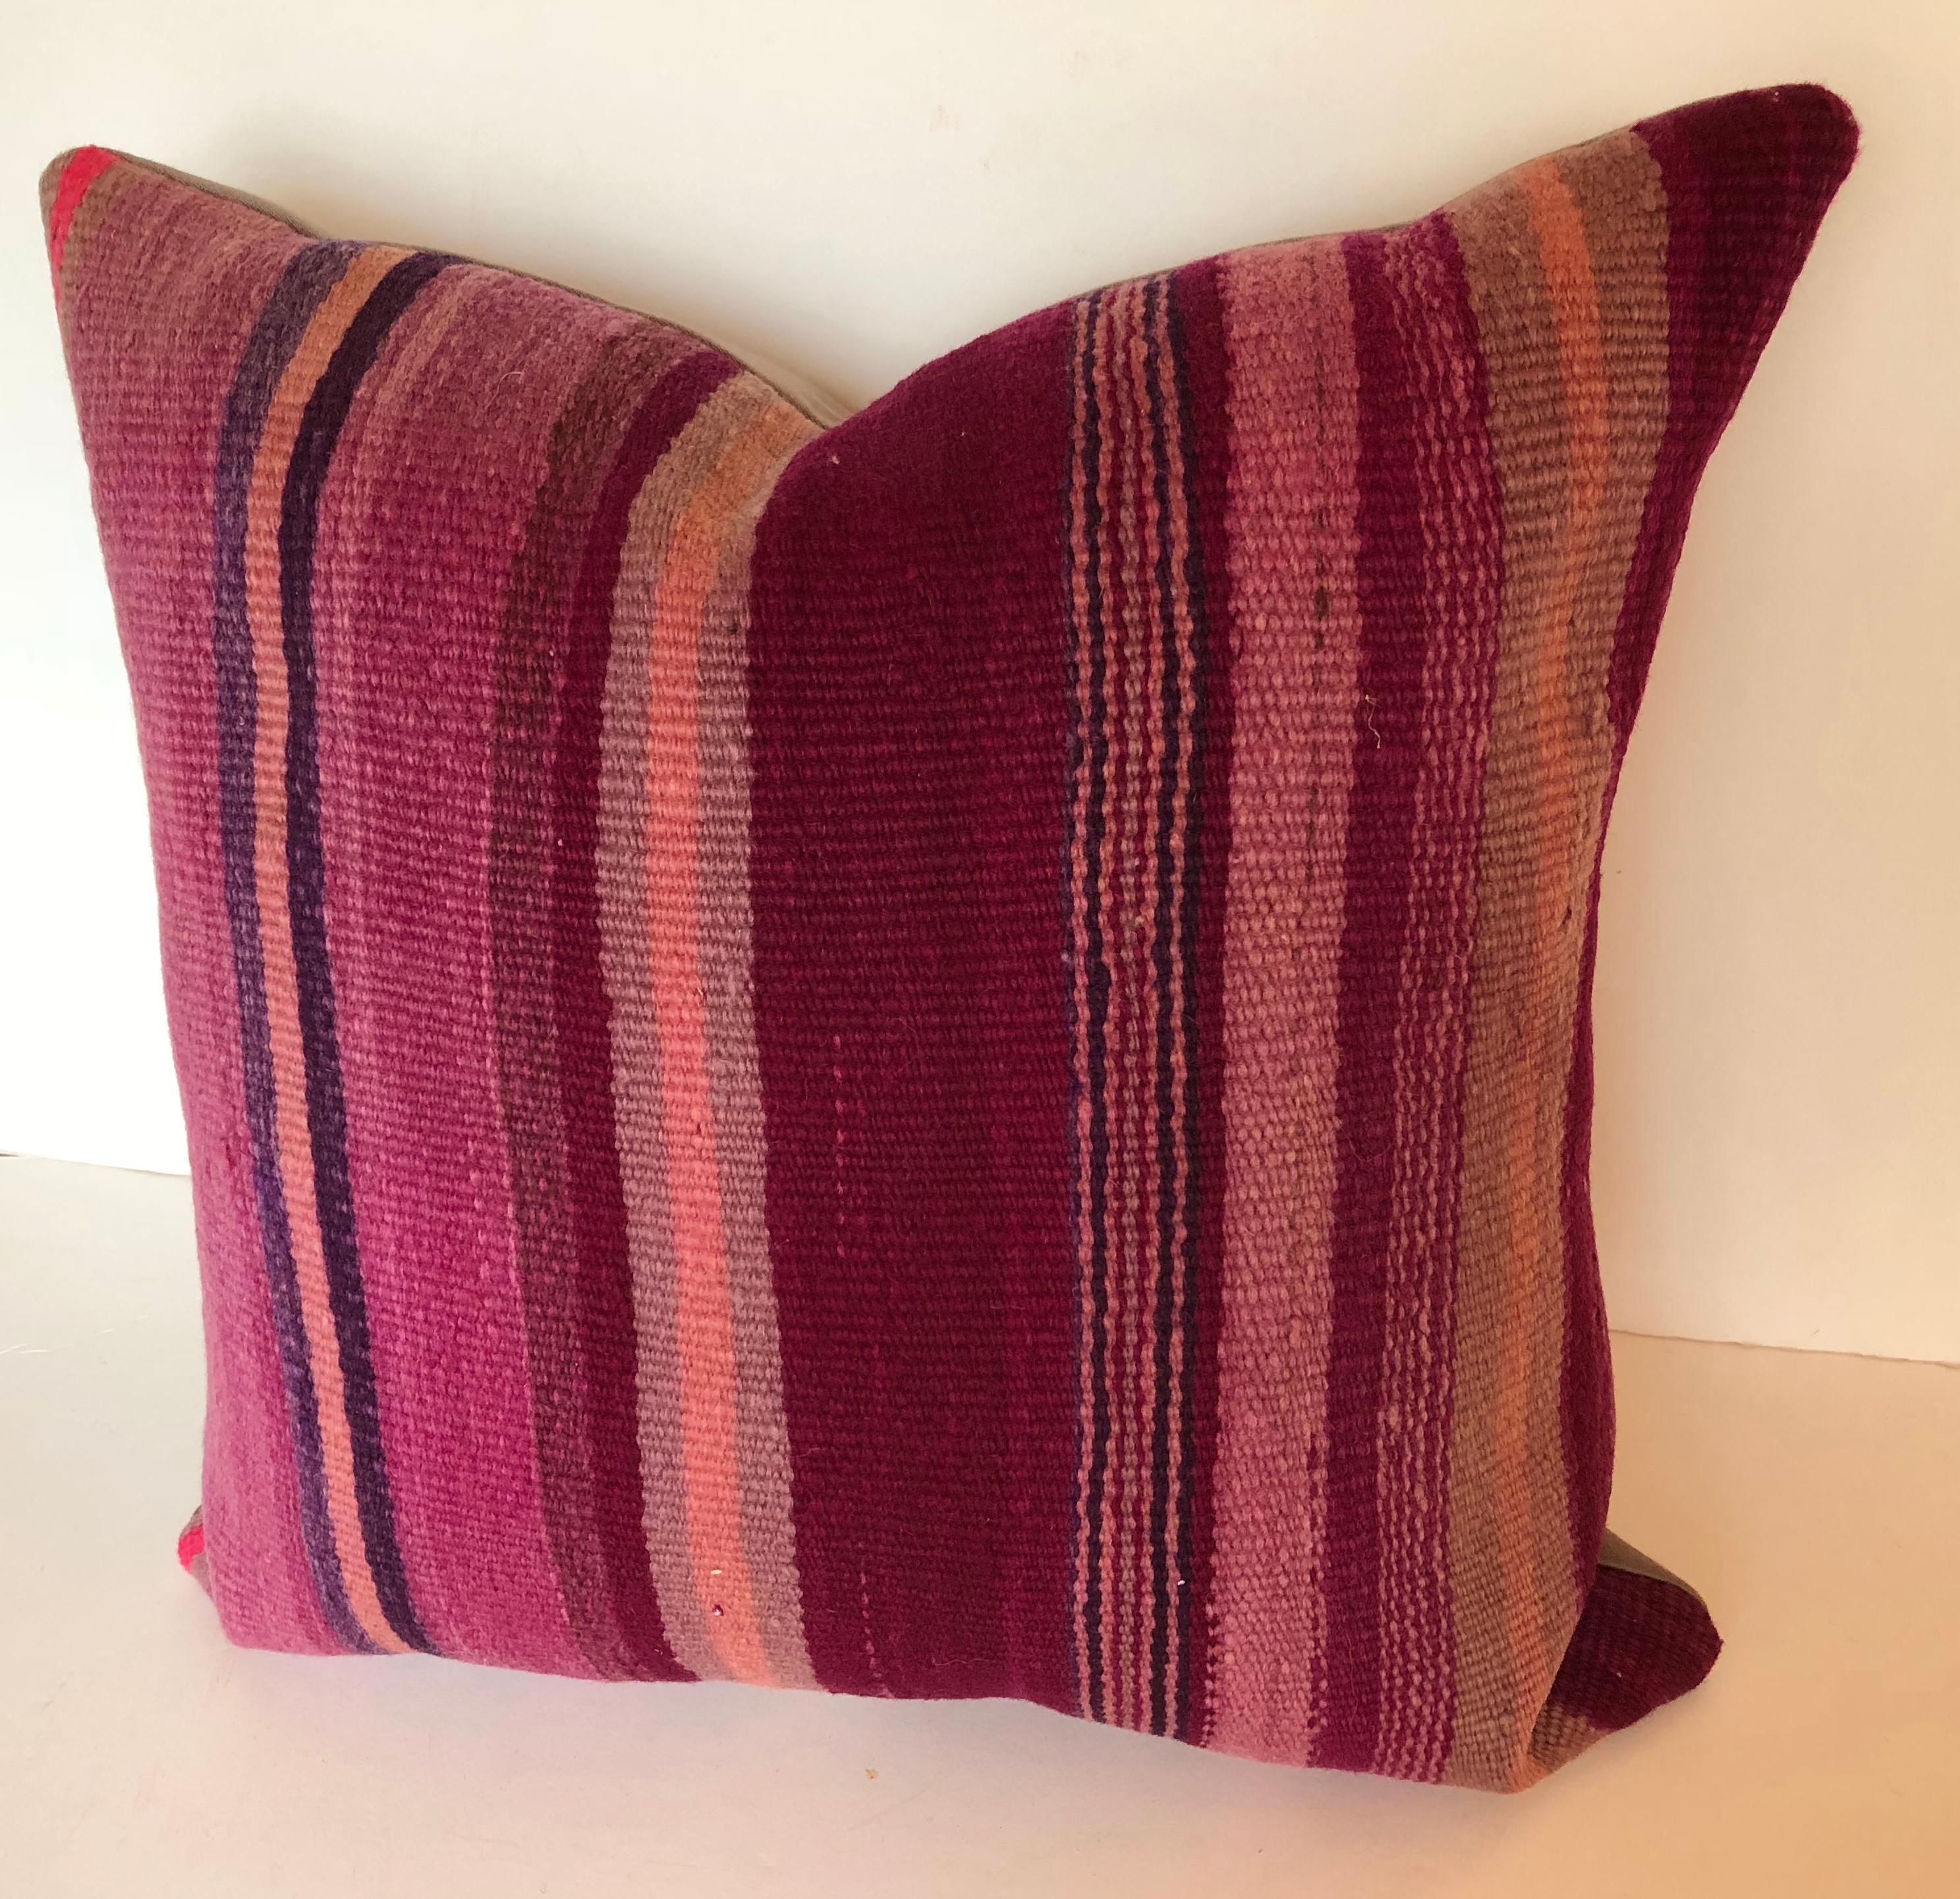 Custom pillow cut from a vintage Moroccan hand loomed wool Berber rug from the Atlas Mountains. Wool is soft and lustrous with stripes in shades of purple. Pillow is backed in a wool blend, filled with an insert of 50/50 down and feathers and hand